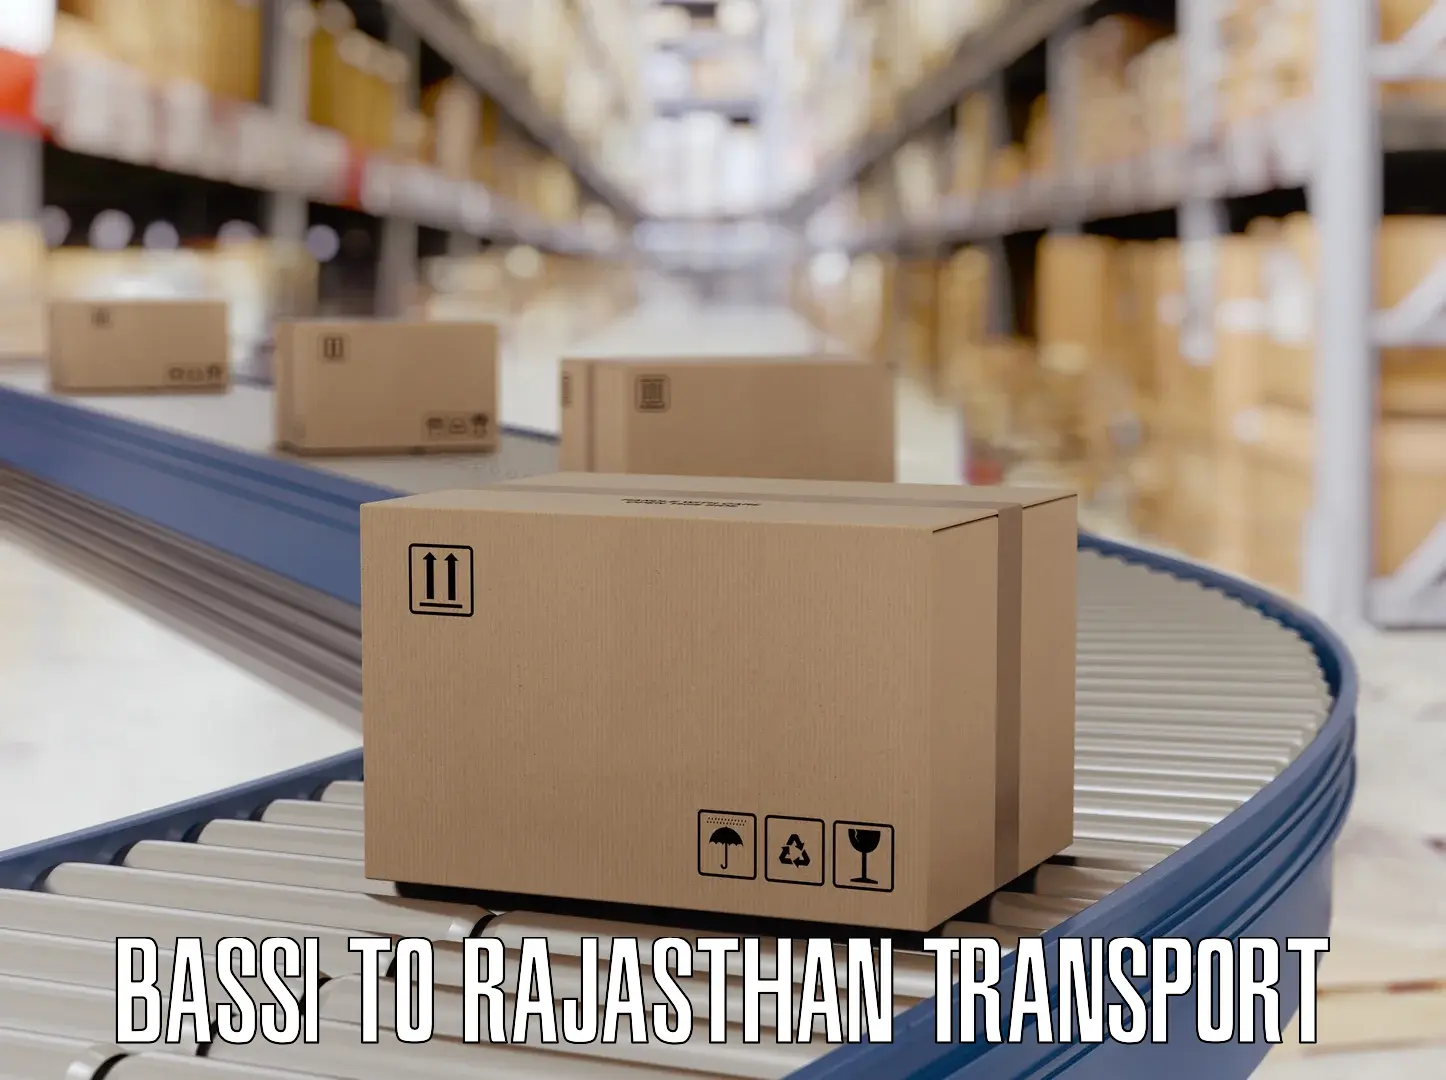 Transportation services Bassi to Bassi